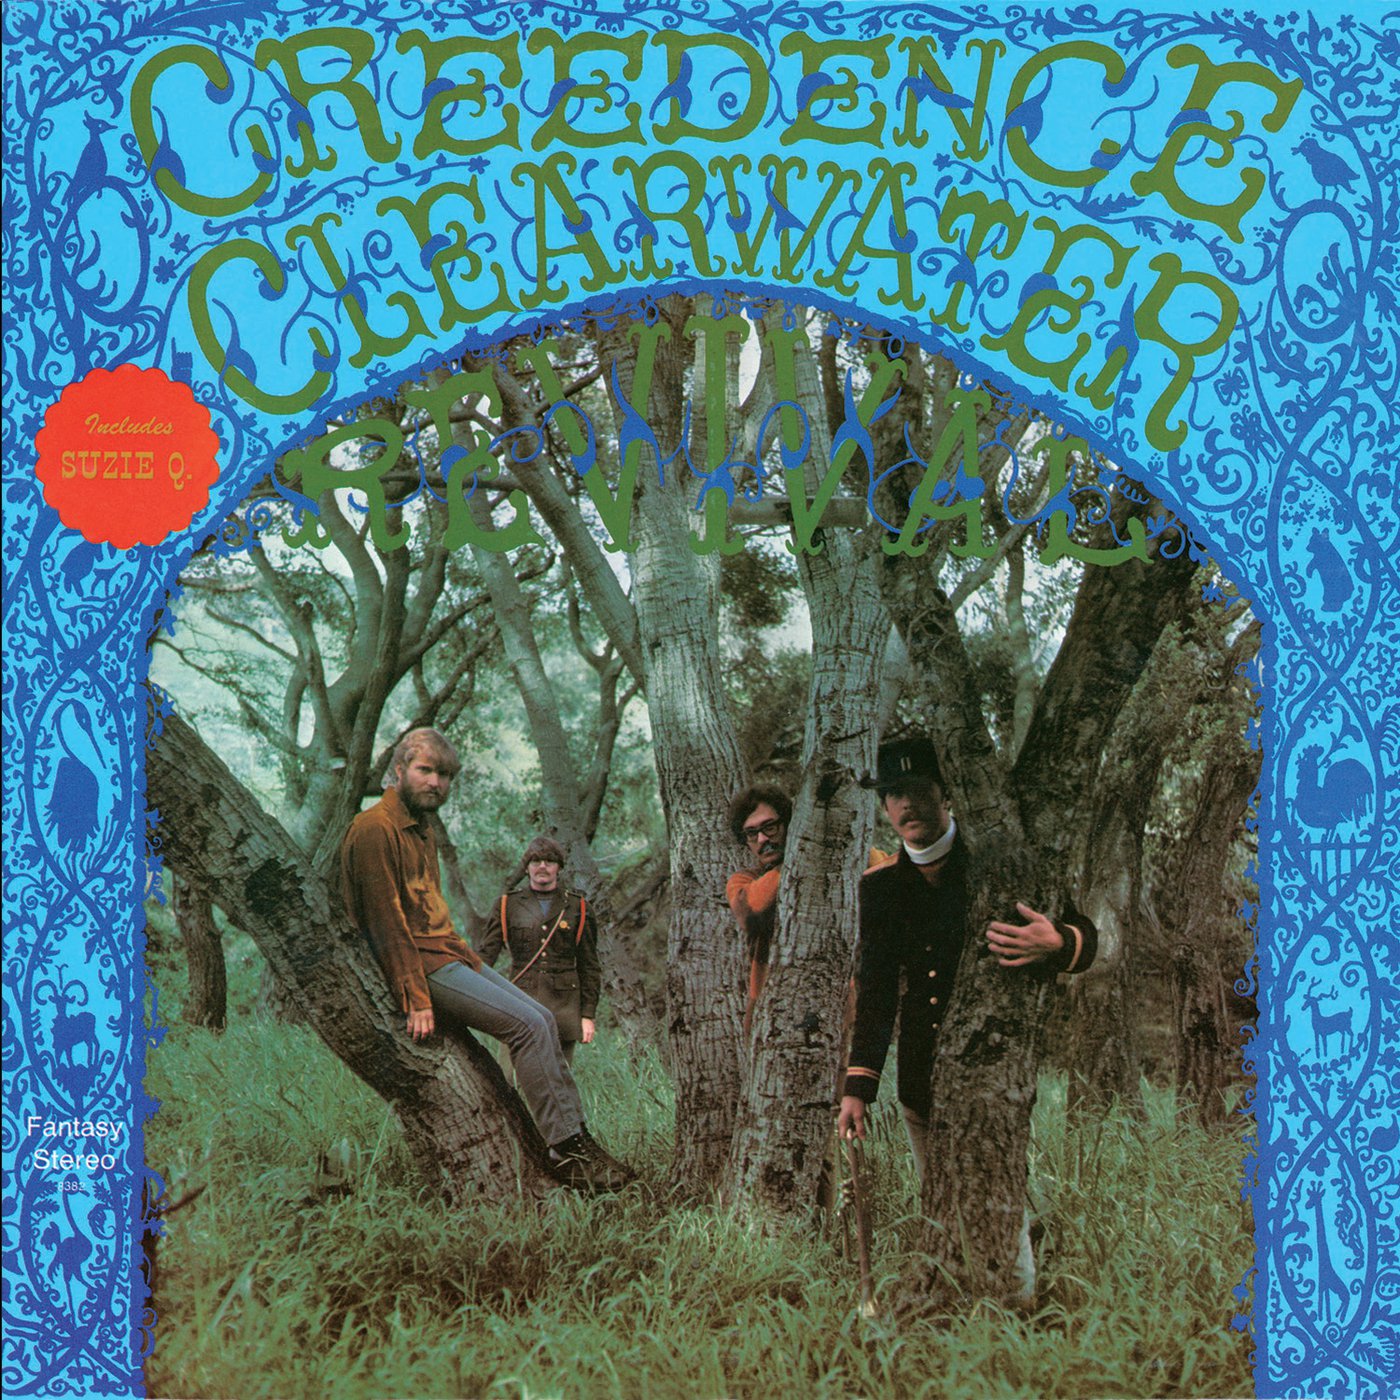 цена Creedence Clearwater Revival. Creedence Clearvater Revival (LP)